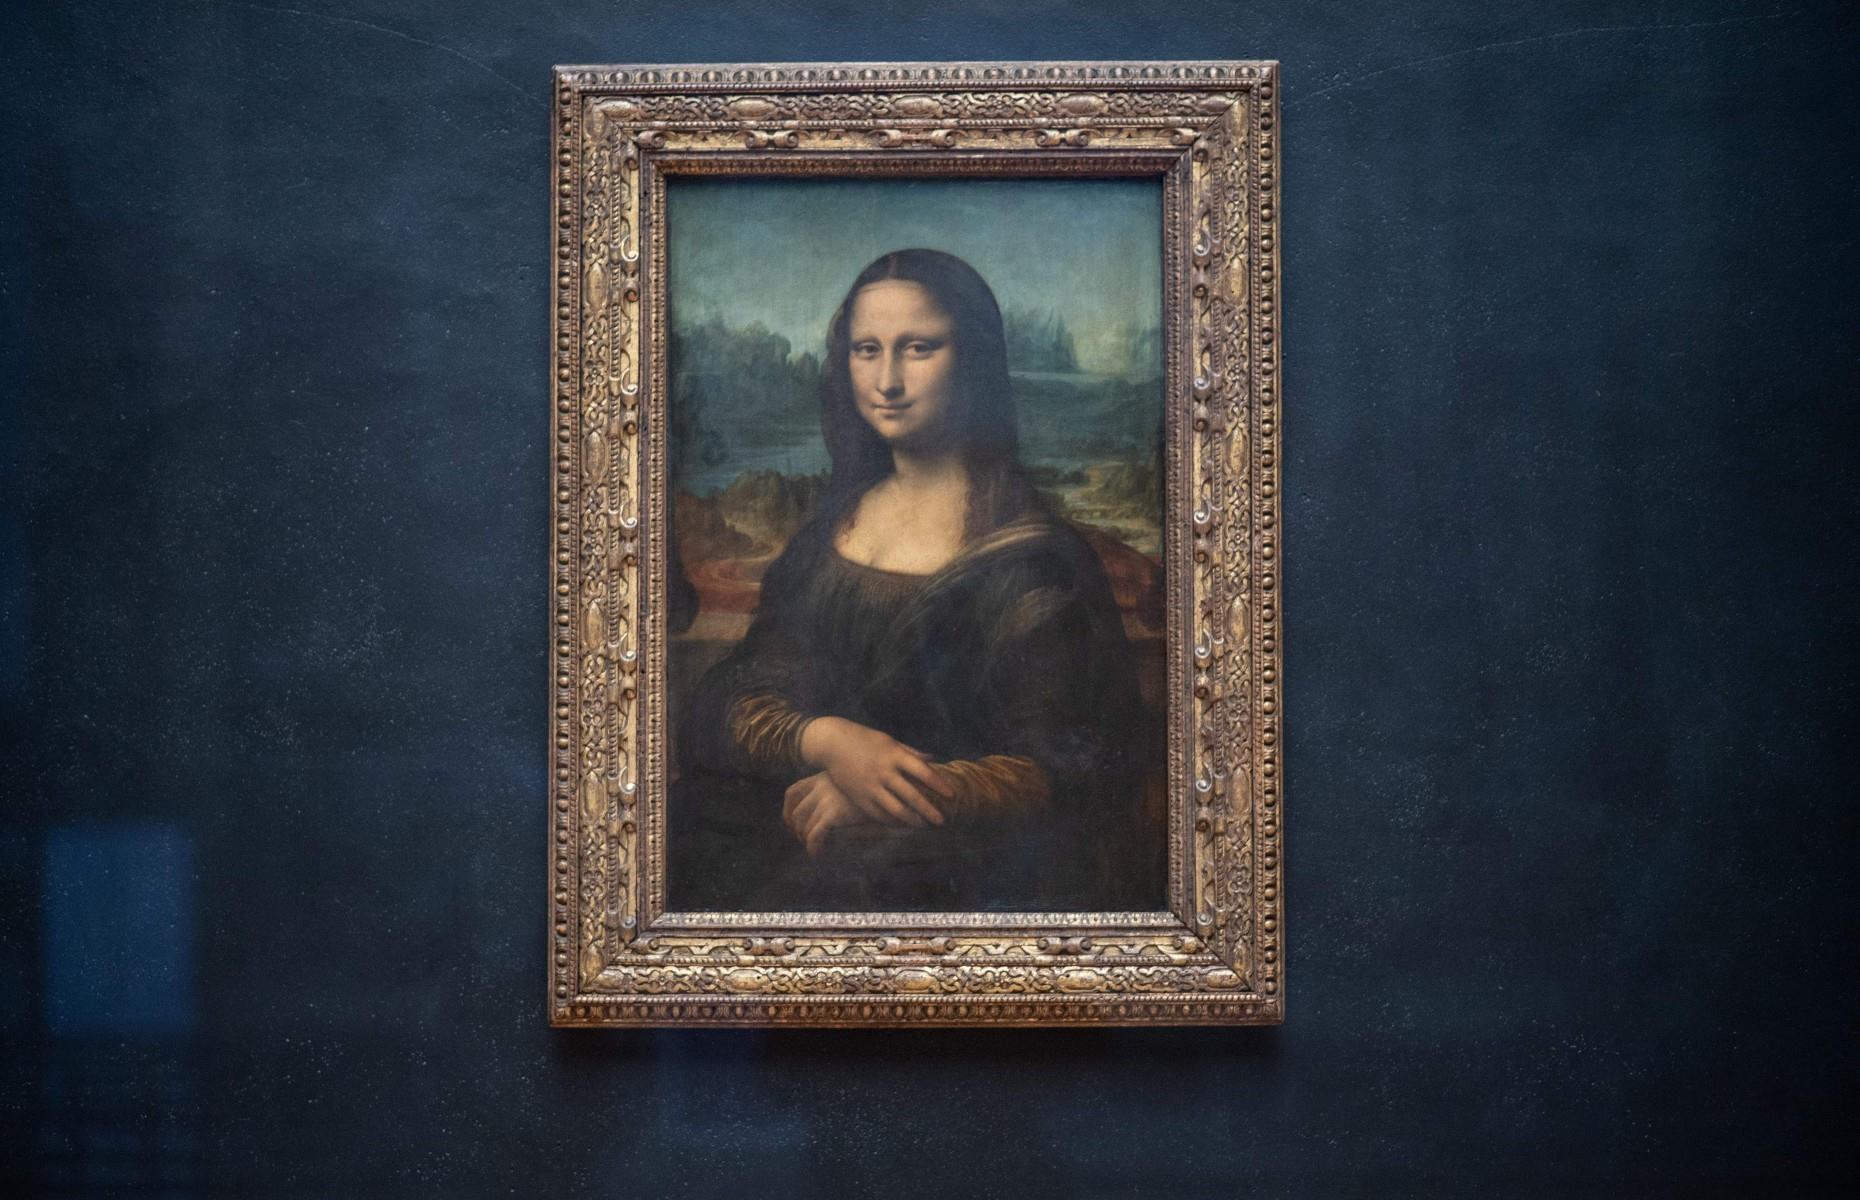 <p>Most of us know that the <em>Mona Lisa</em> is a portrait by Italian artist Leonardo da Vinci. The work is considered a masterpiece of the Italian Renaissance. The half-length oil painting depicts a plain-looking lady, in plain dress, but the most famous elements of da Vinci’s painting are the subject’s enigmatic smile and the age-old mystery surrounding her identity.</p>